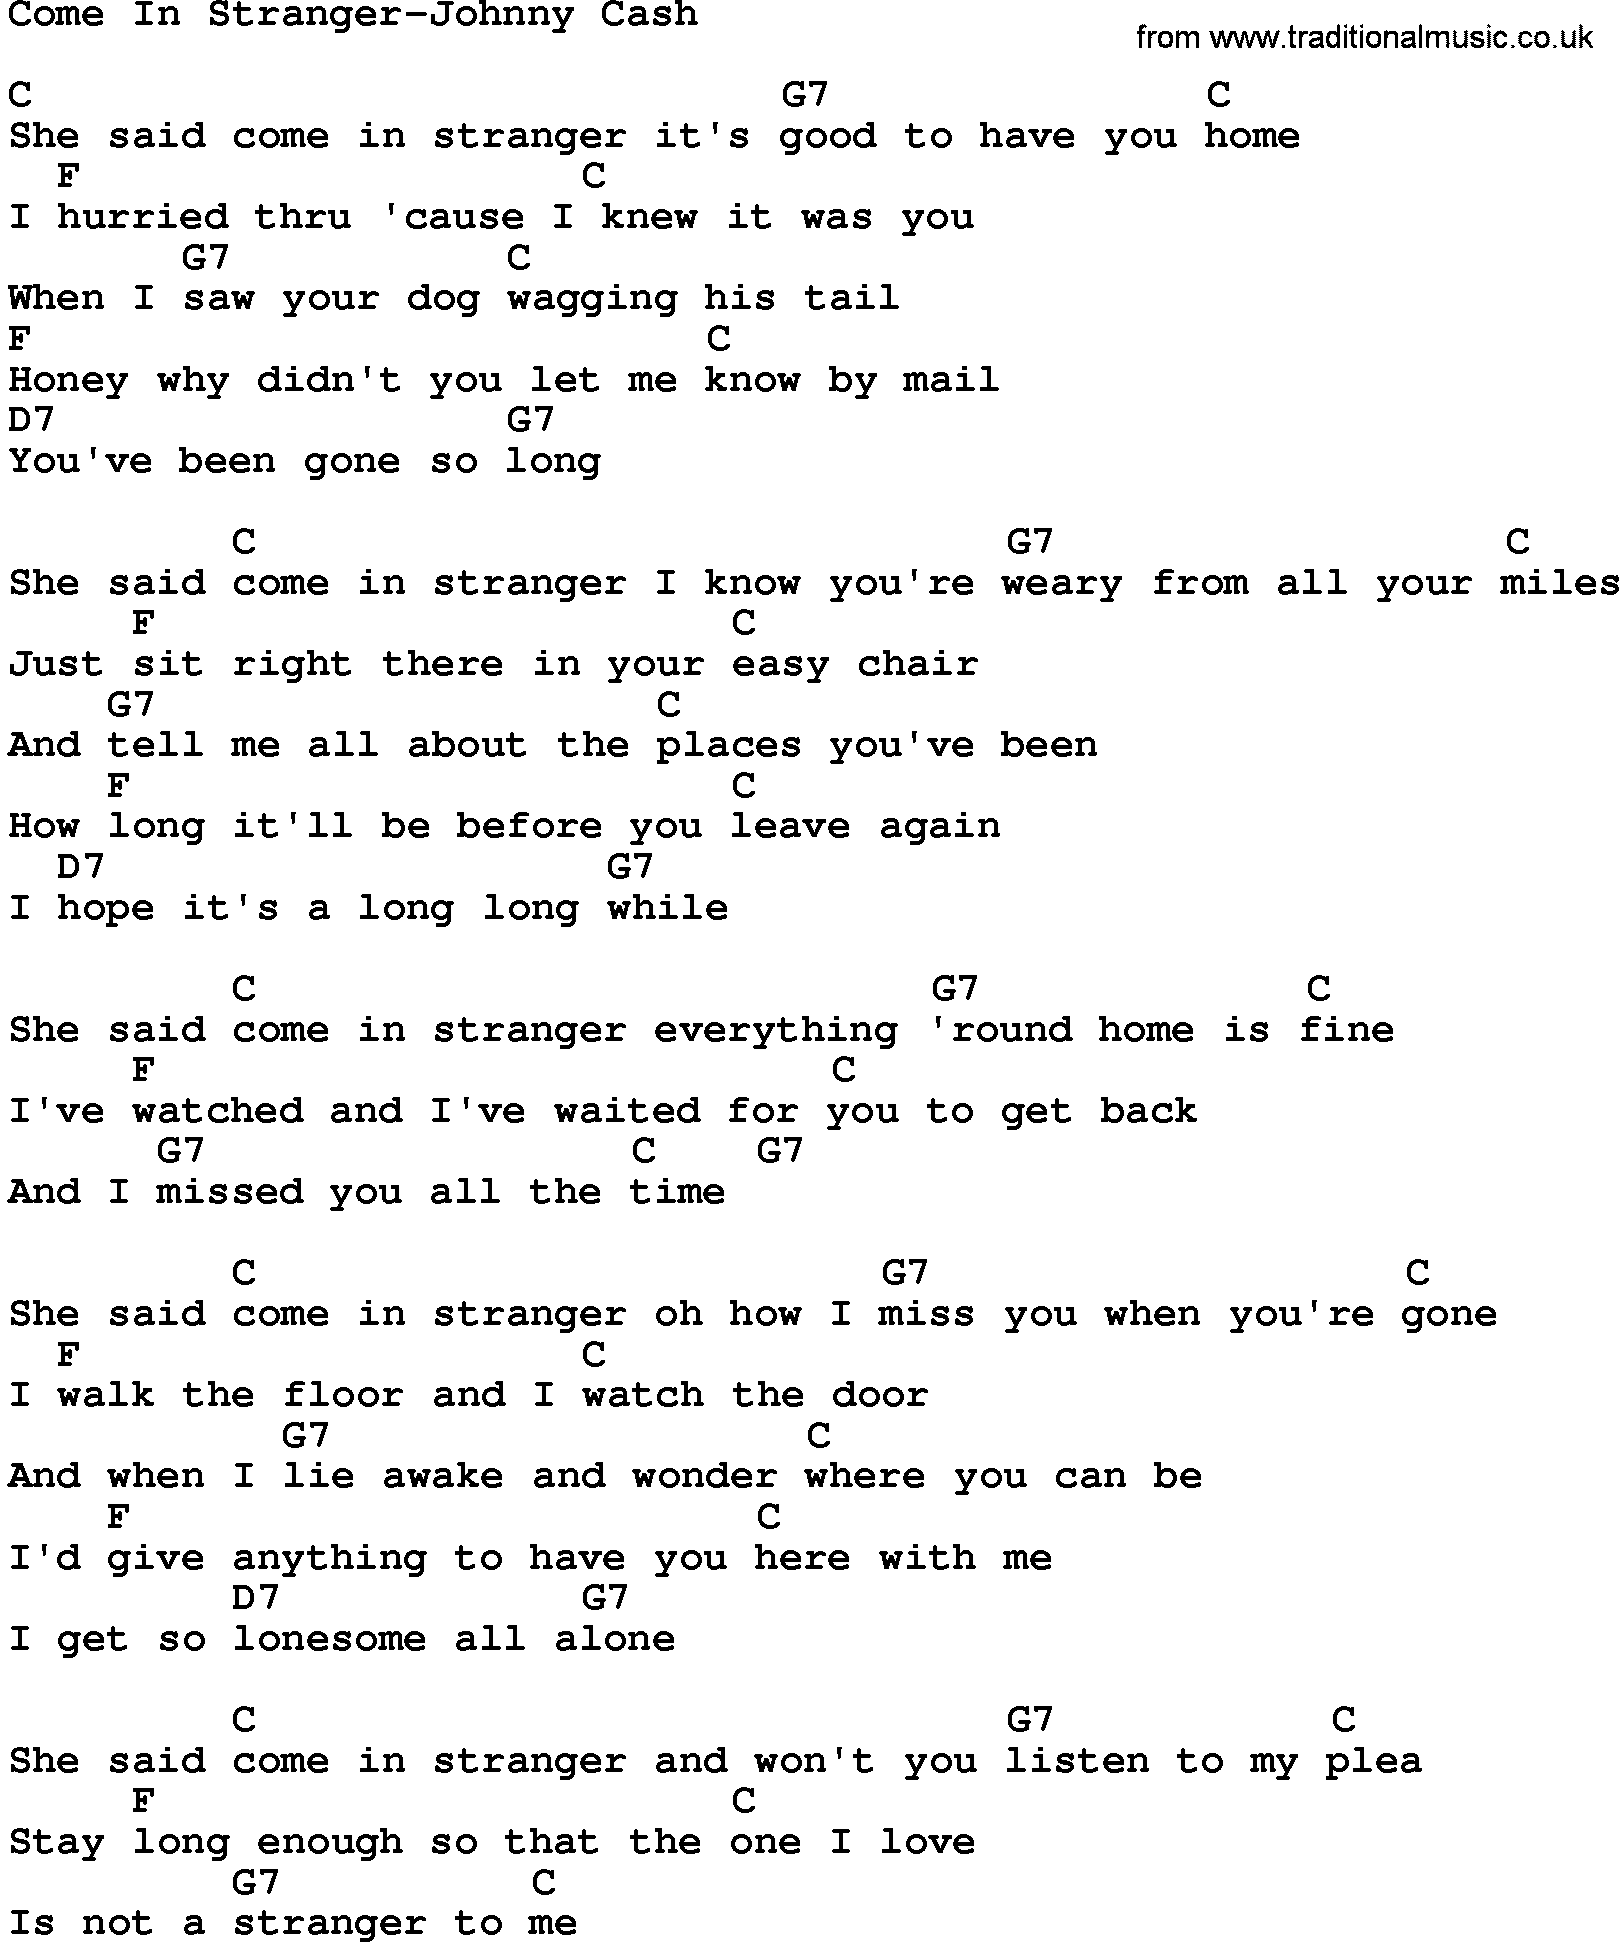 Country music song: Come In Stranger-Johnny Cash lyrics and chords